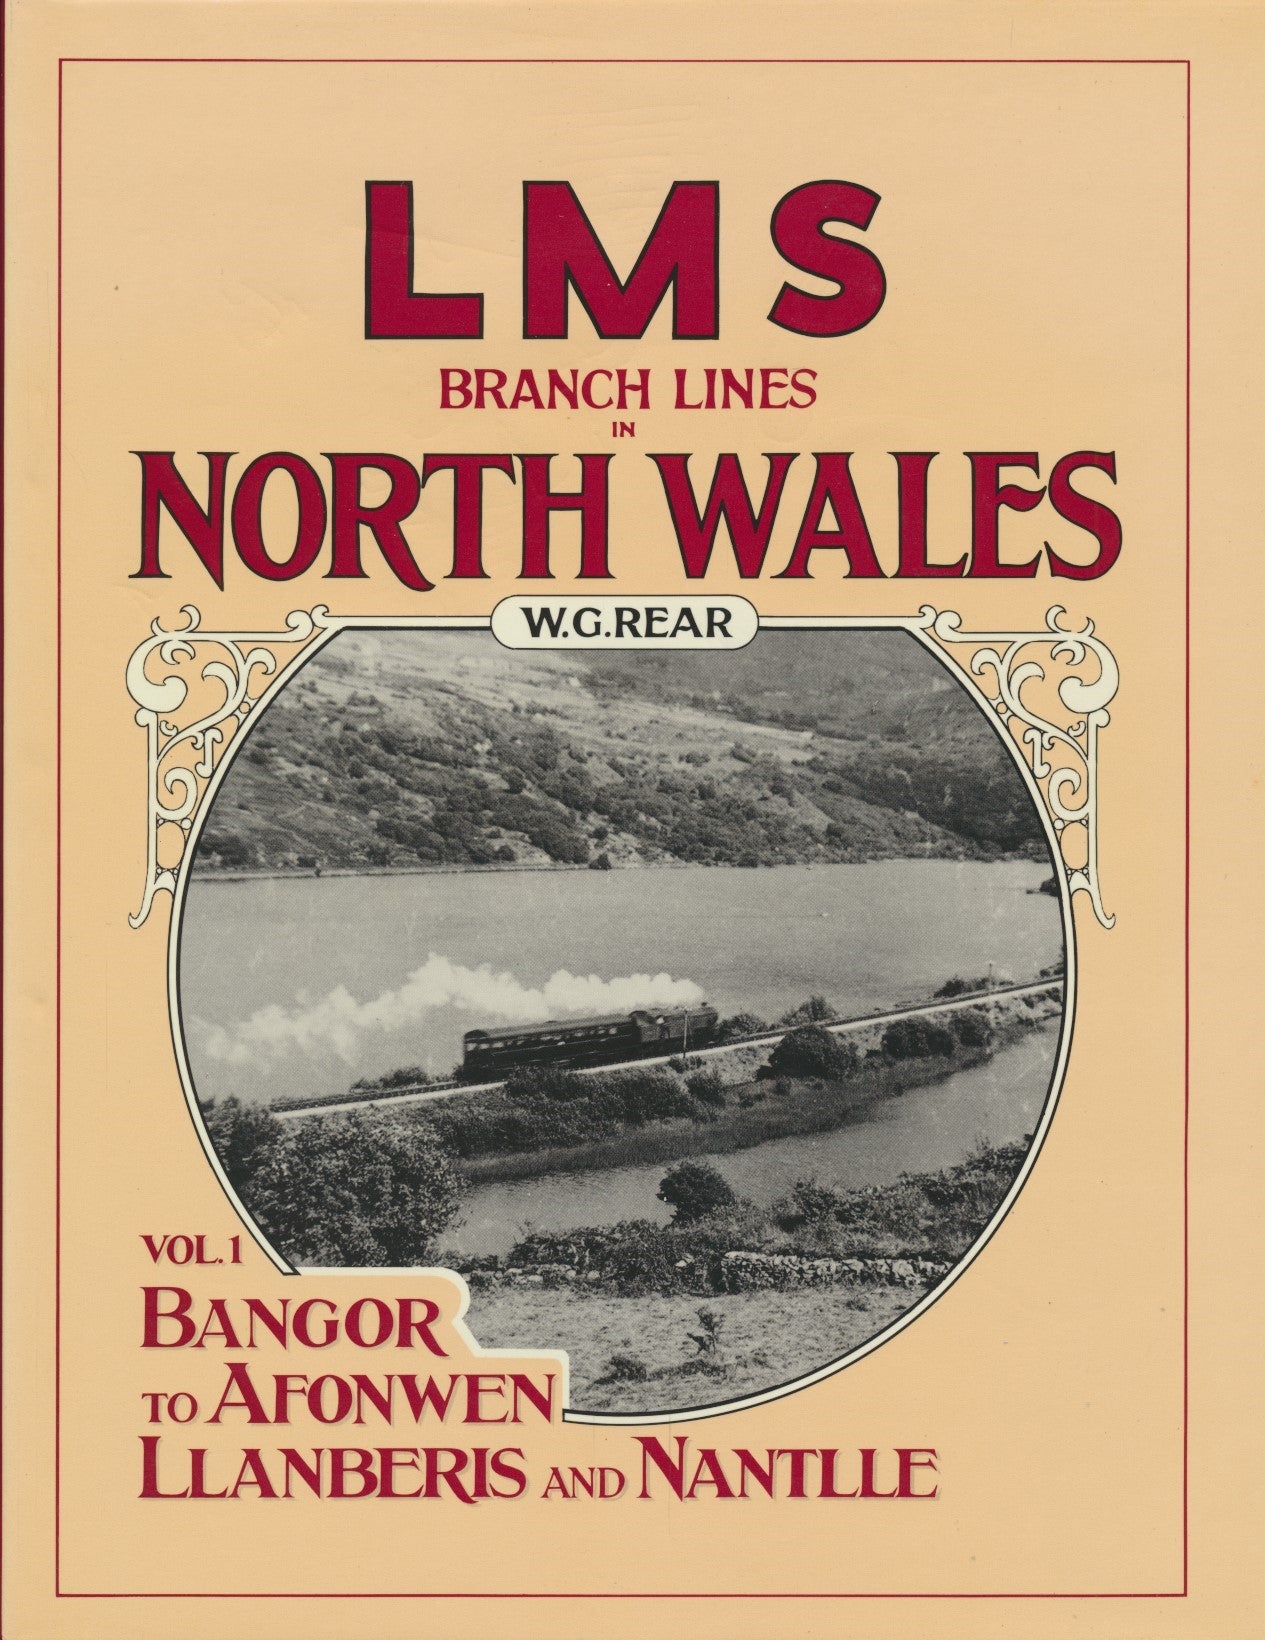 LMS Branch Lines in North Wales, volume 1 - Bangor to Afonwen, Llanberis and Nantlle